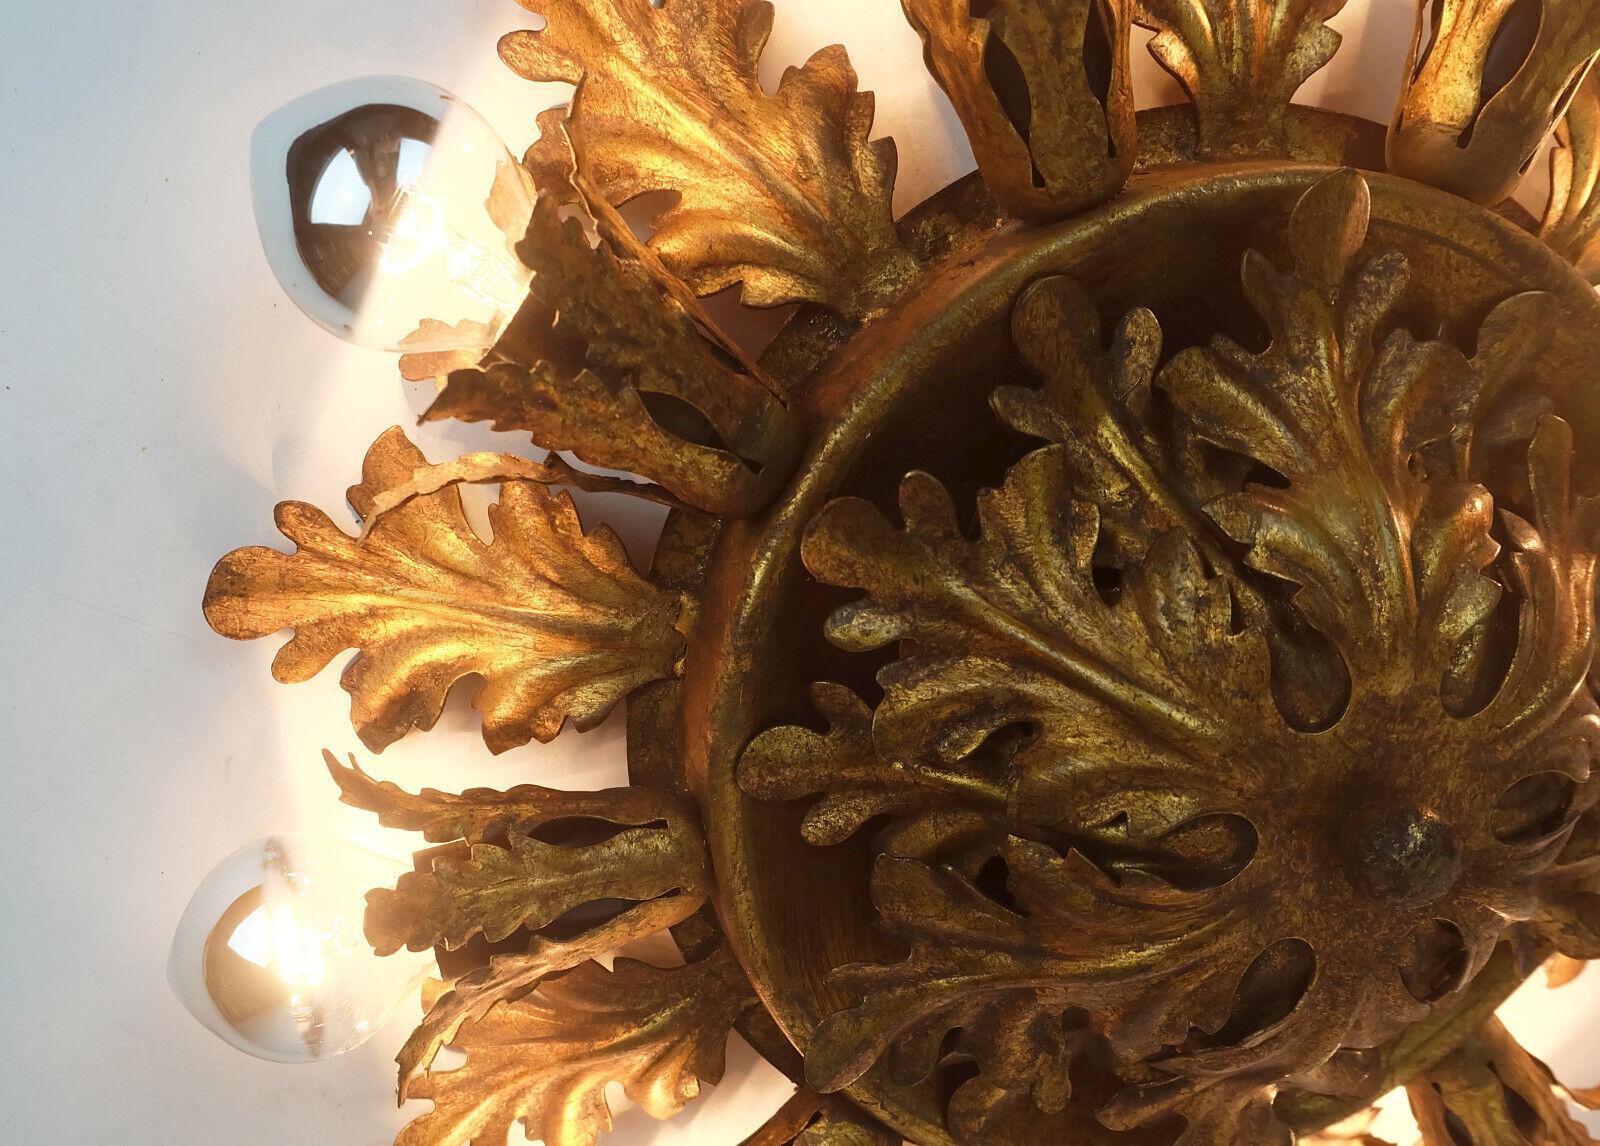 Very beautiful and decorative Florentine ceiling lamp. Opulently crafted with metal leaves, the color is a warm golden bronze tone. Italian production, most probably made by Banci in the 1960s. Hold 9 sockets for E14 light bulbs. You can use all